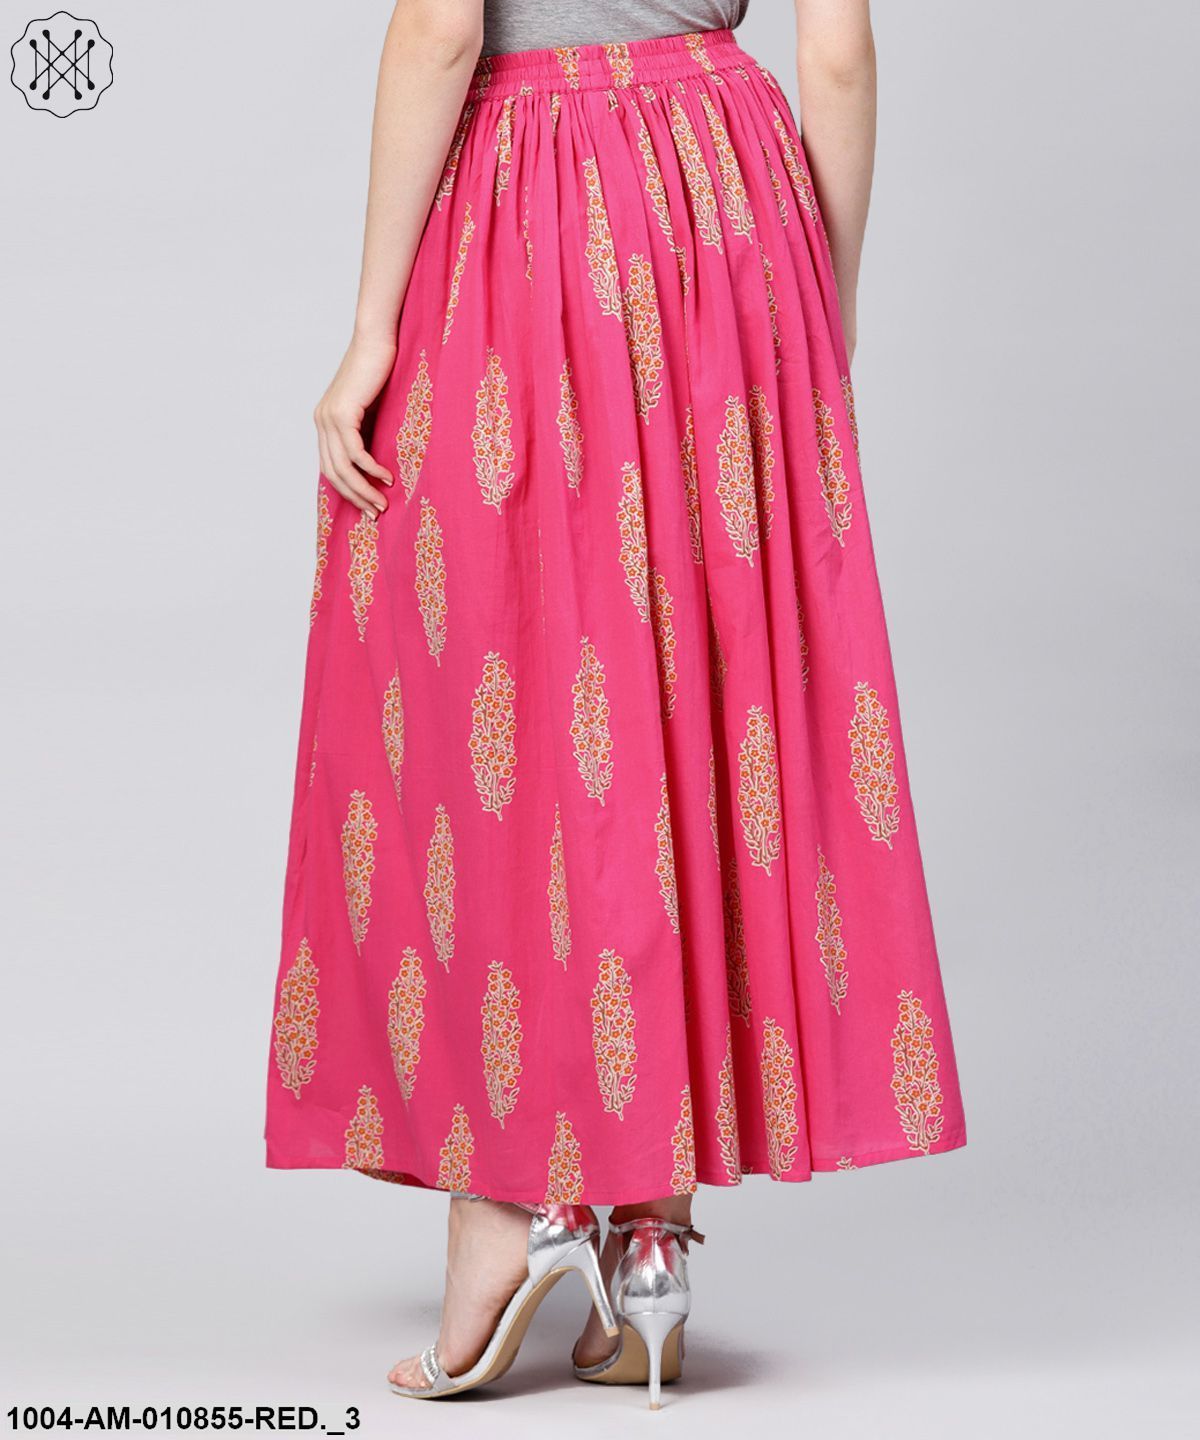 Red Printed Cotton Ankle Length Flared Skirt